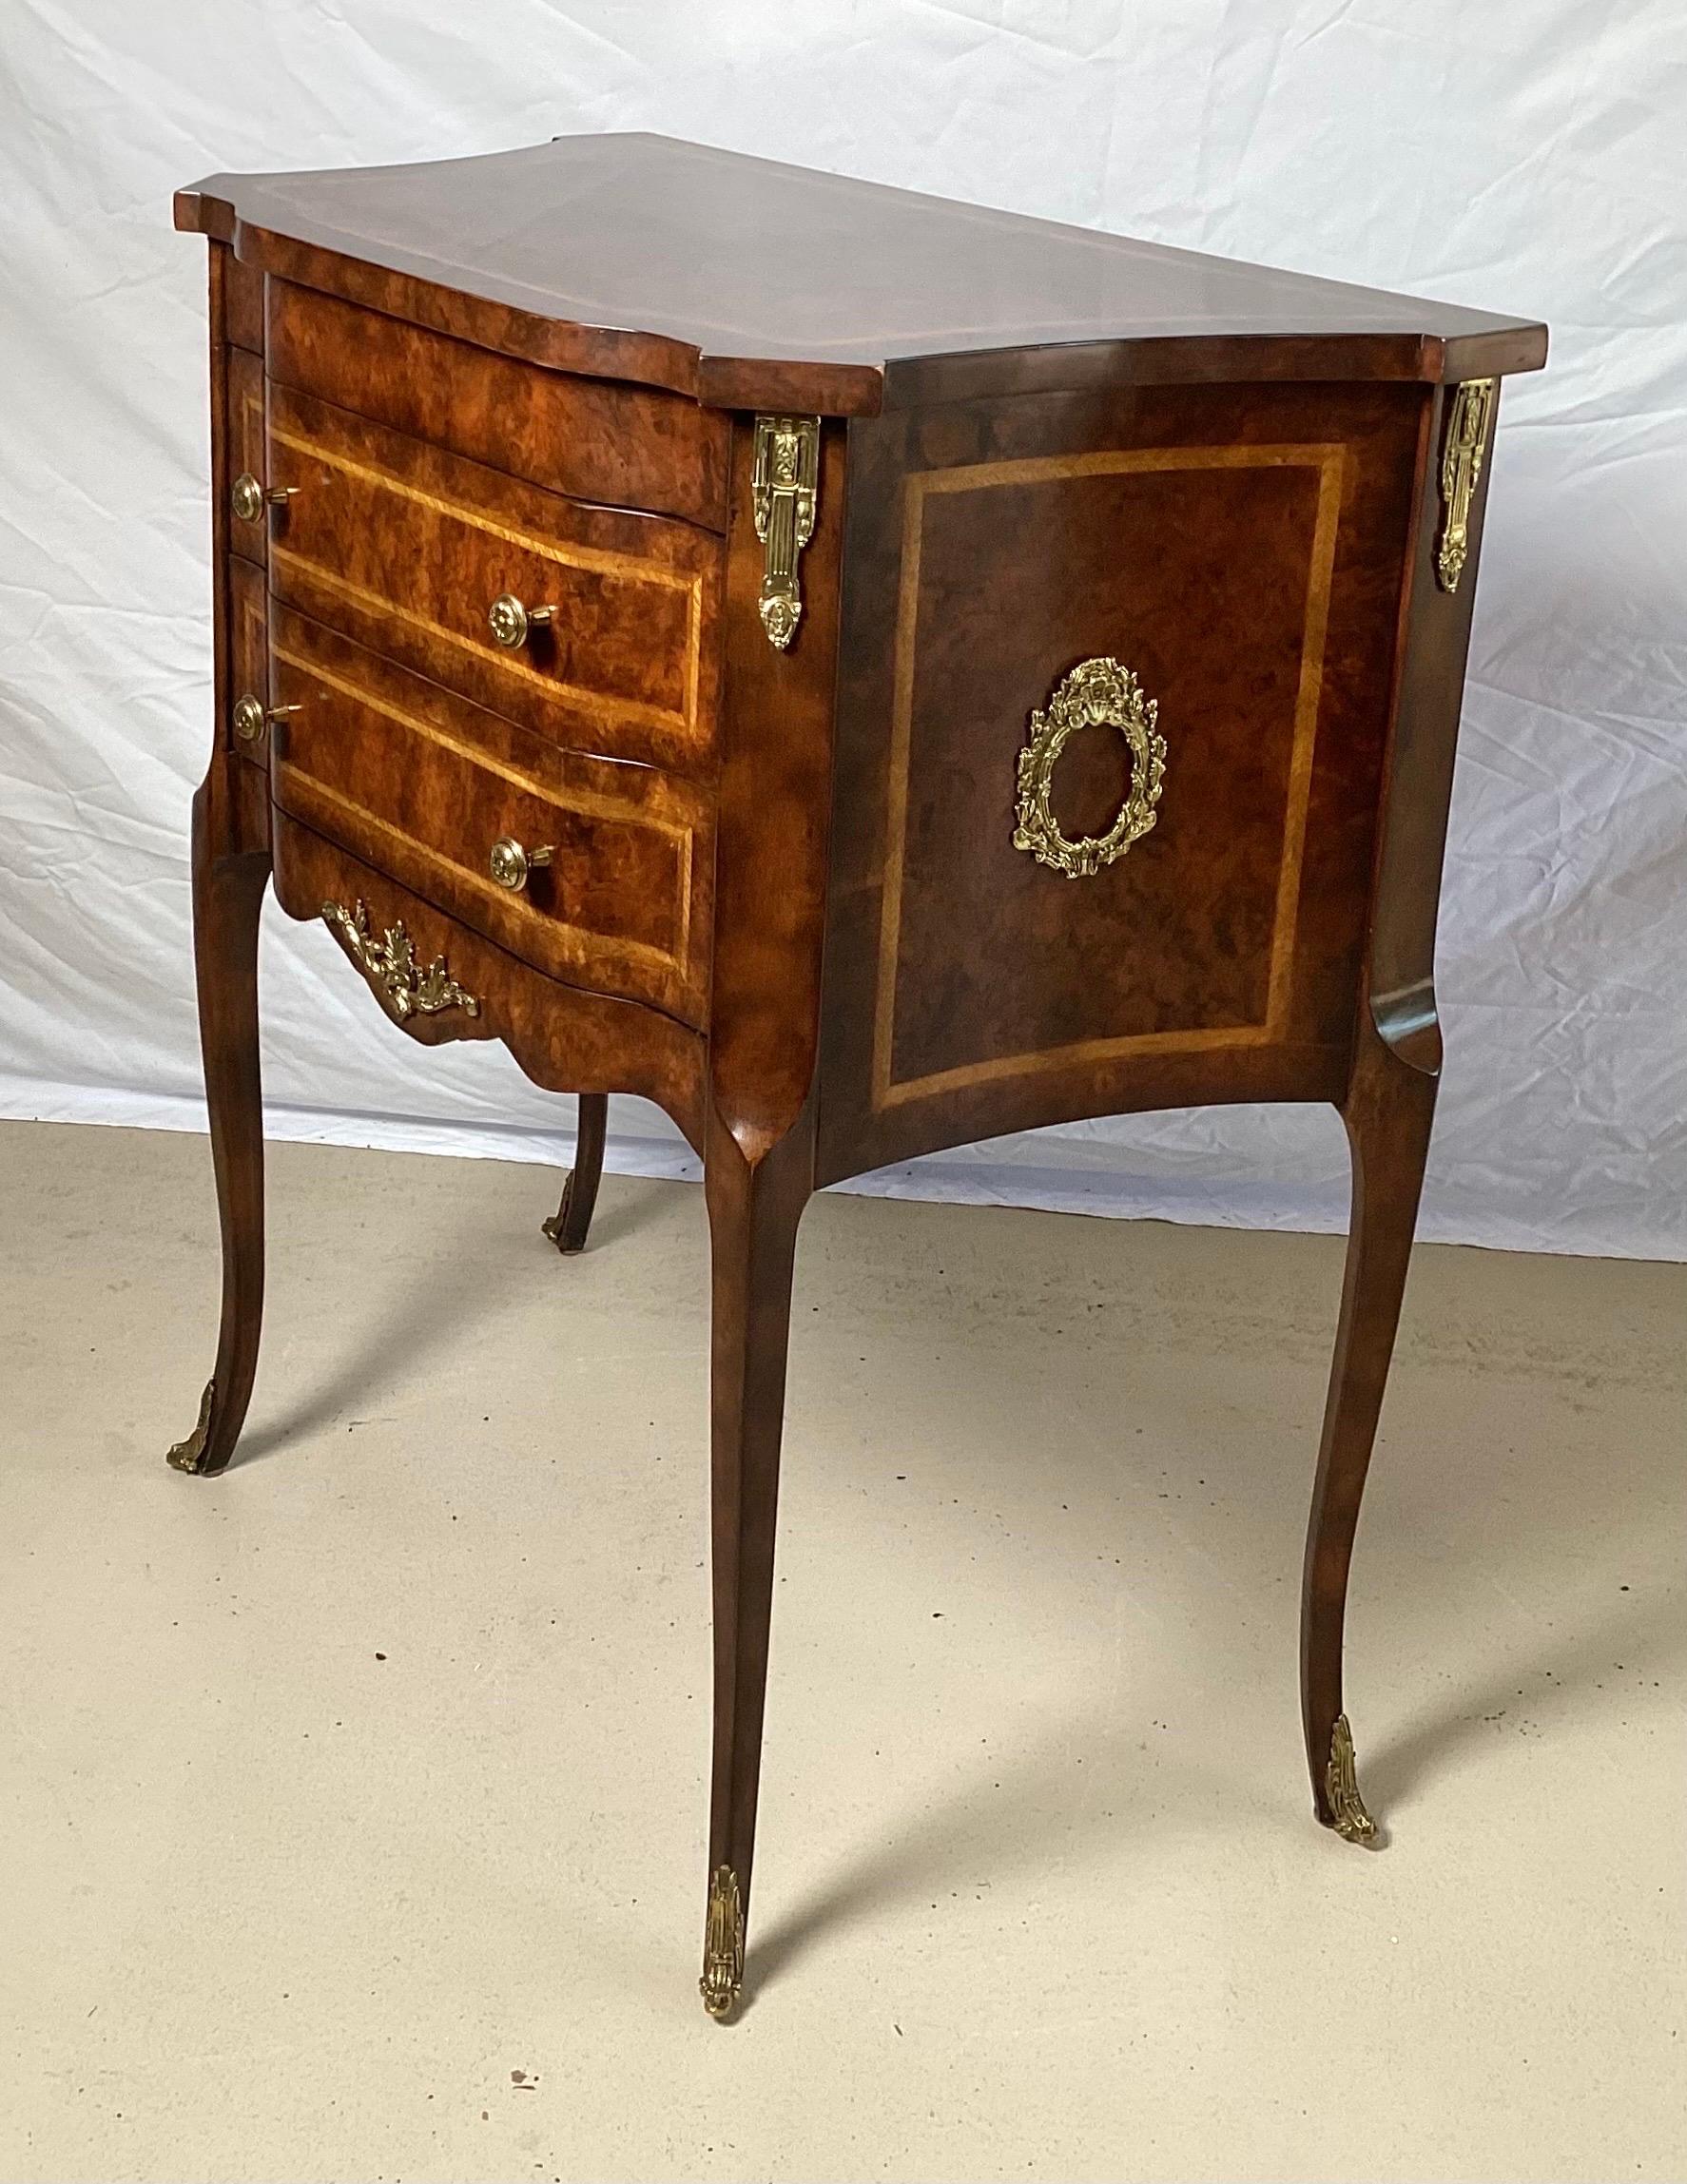 Ormolu Diminutive Burl Walnut and Satinwood Two Drawer Commode by Maitland Smith